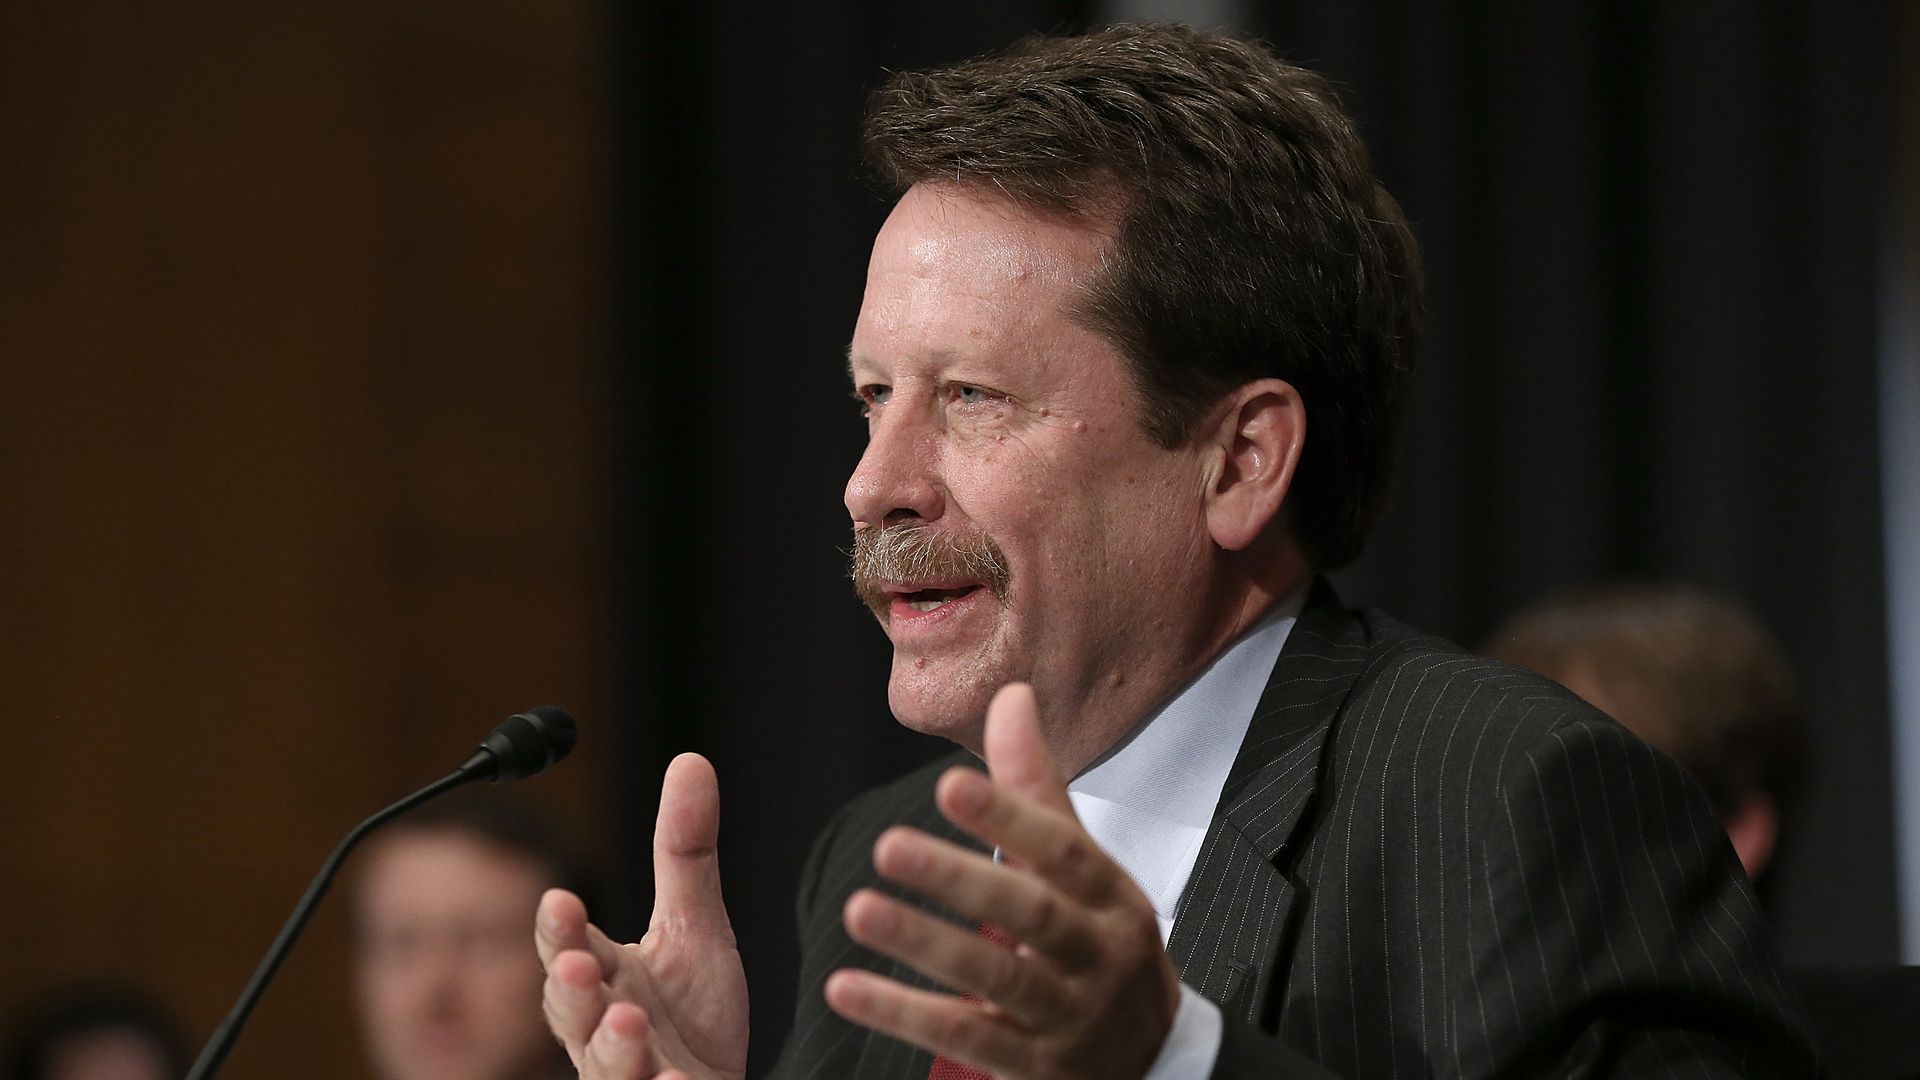 Dr. Robert Califf testifies during his nomination hearing before the Senate Health, Education, Labor and Pensions Committee November 17, 2015 in Washington, DC.